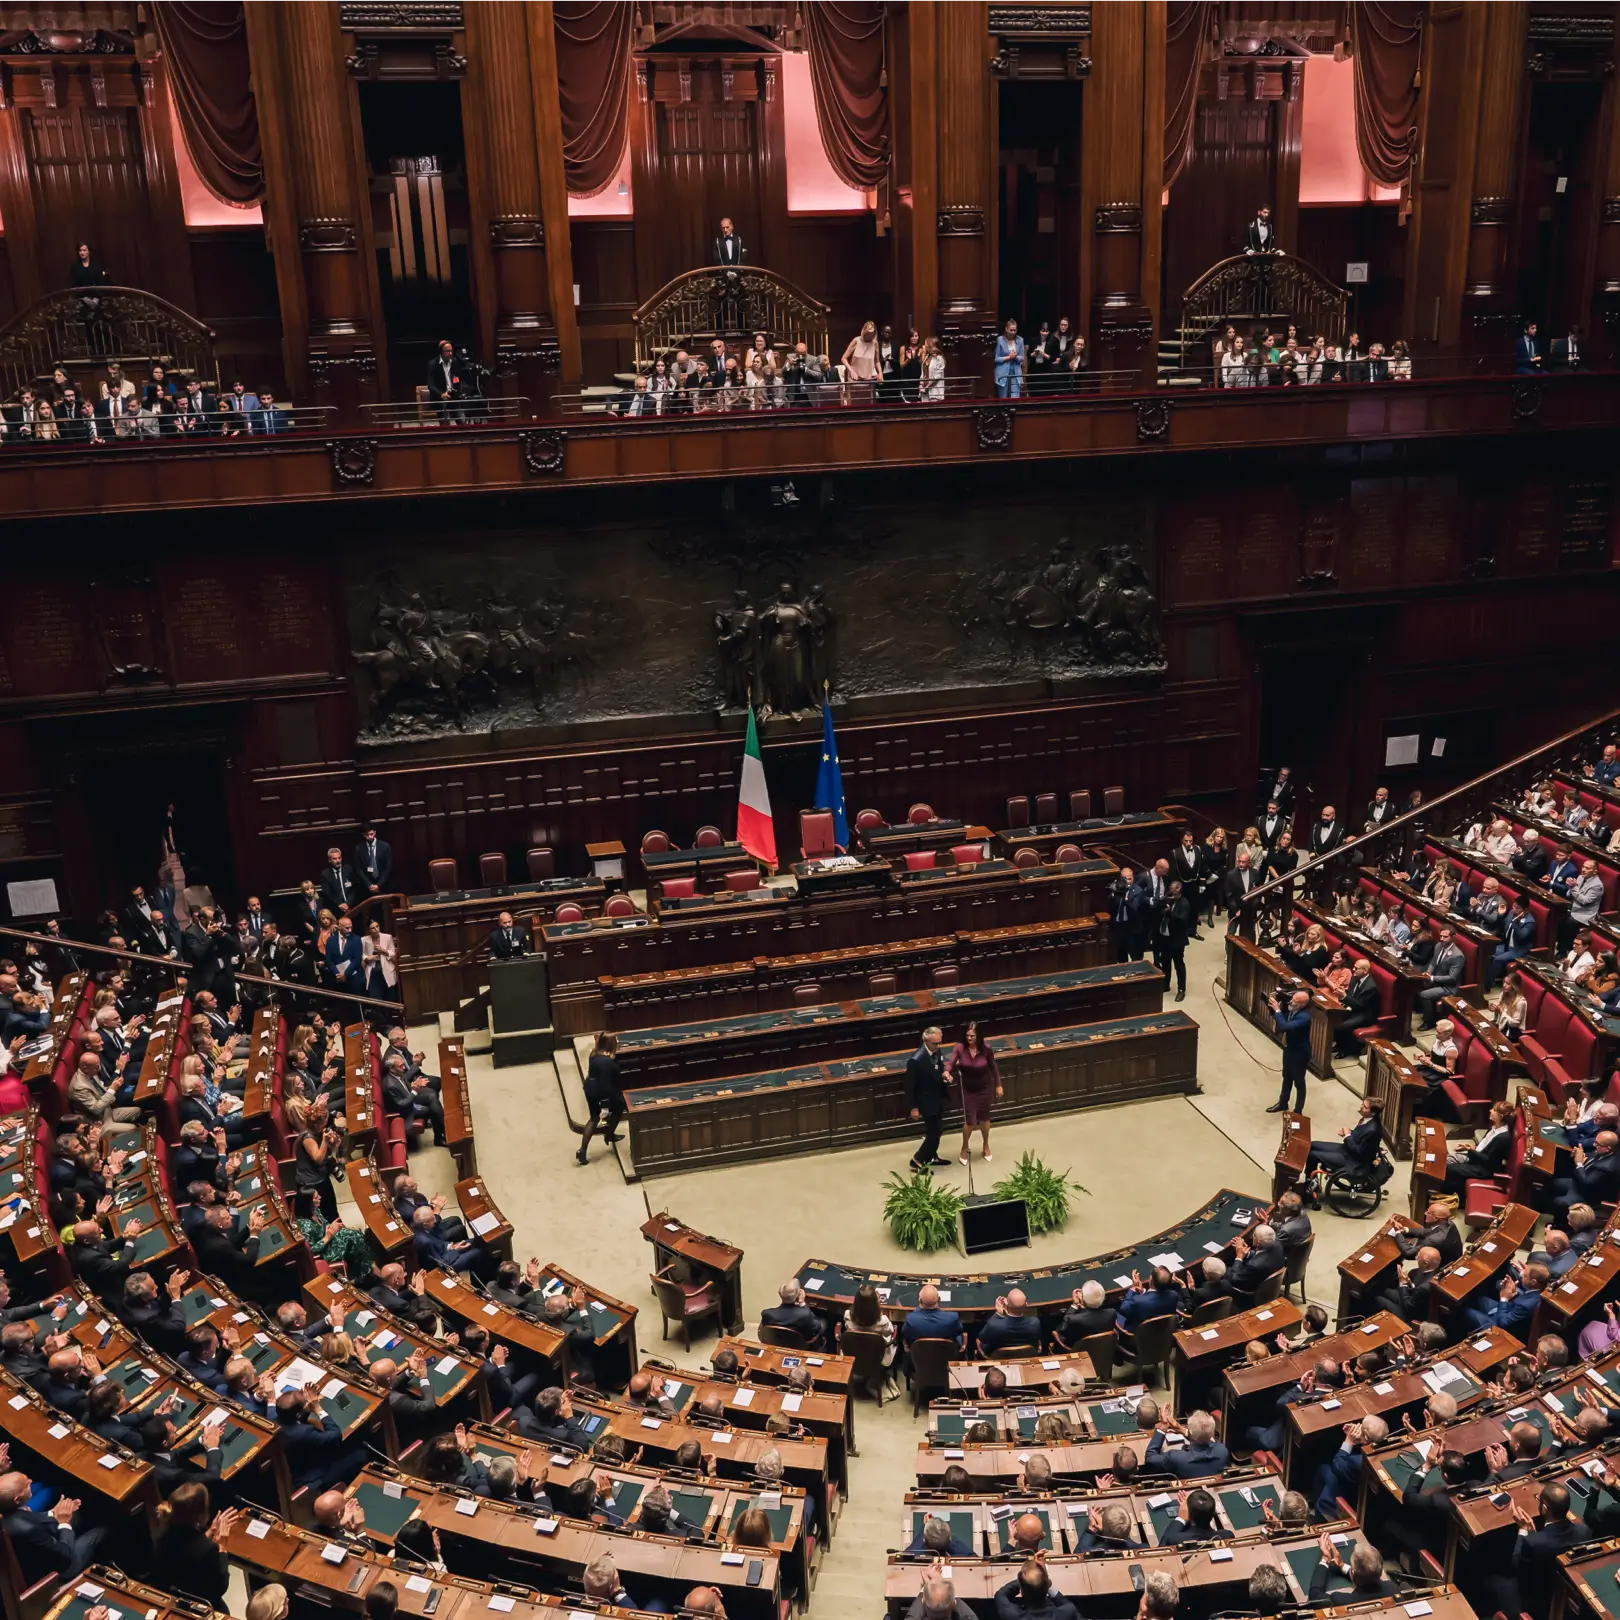 Standing Ovation at the Chamber of Deputies